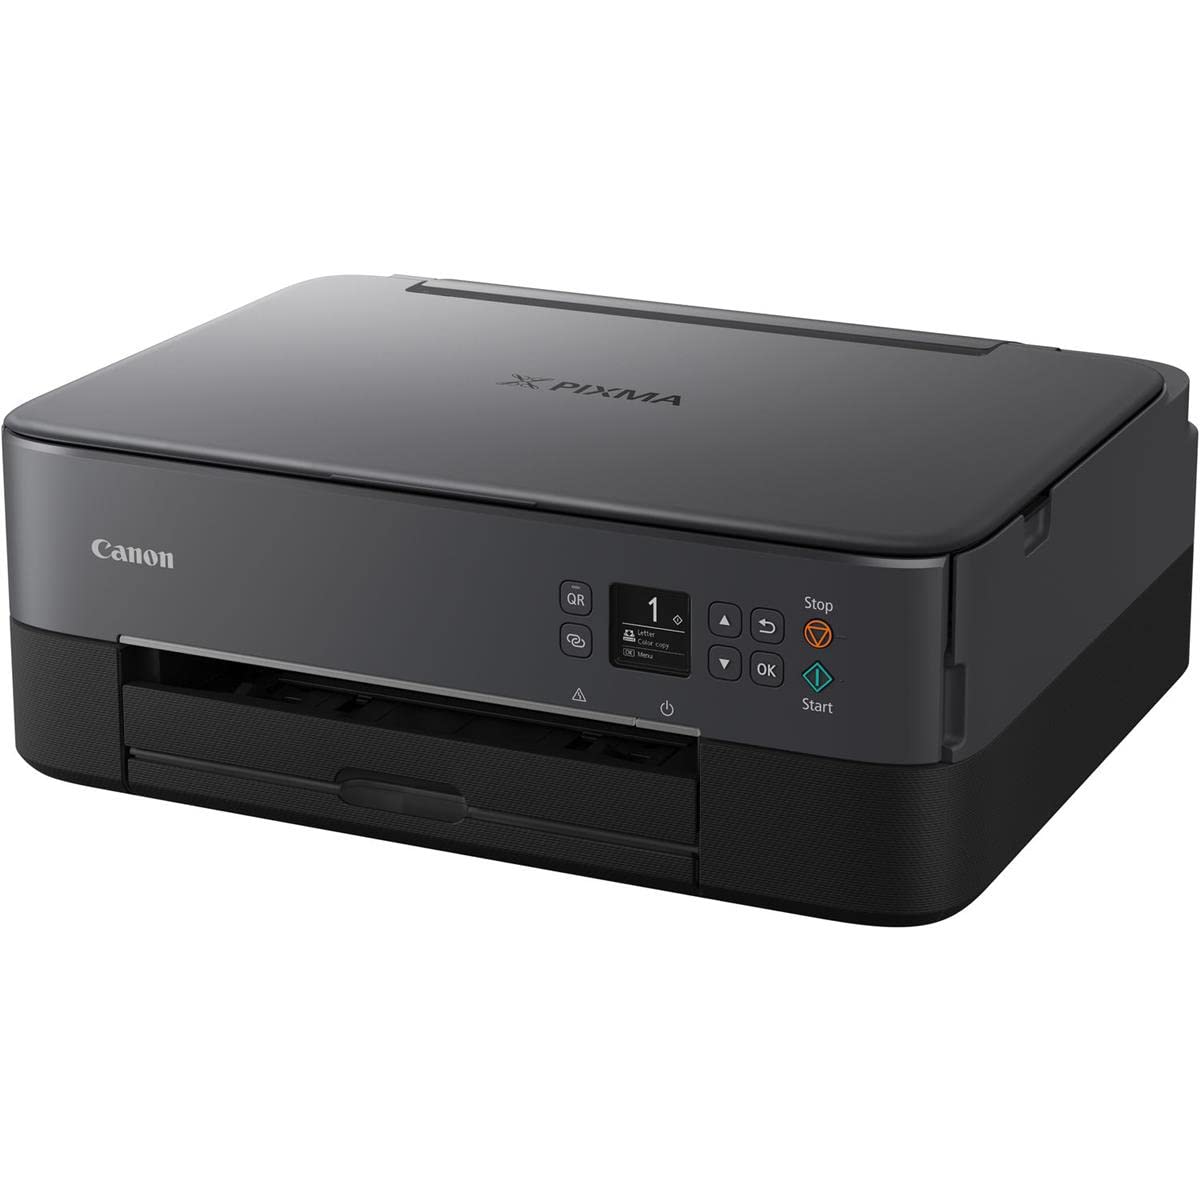 Canon TS5320 All in One Wireless Printer, Scanner, Copier with AirPrint, Black, Amazon Dash Replenishment Ready  - Acceptable